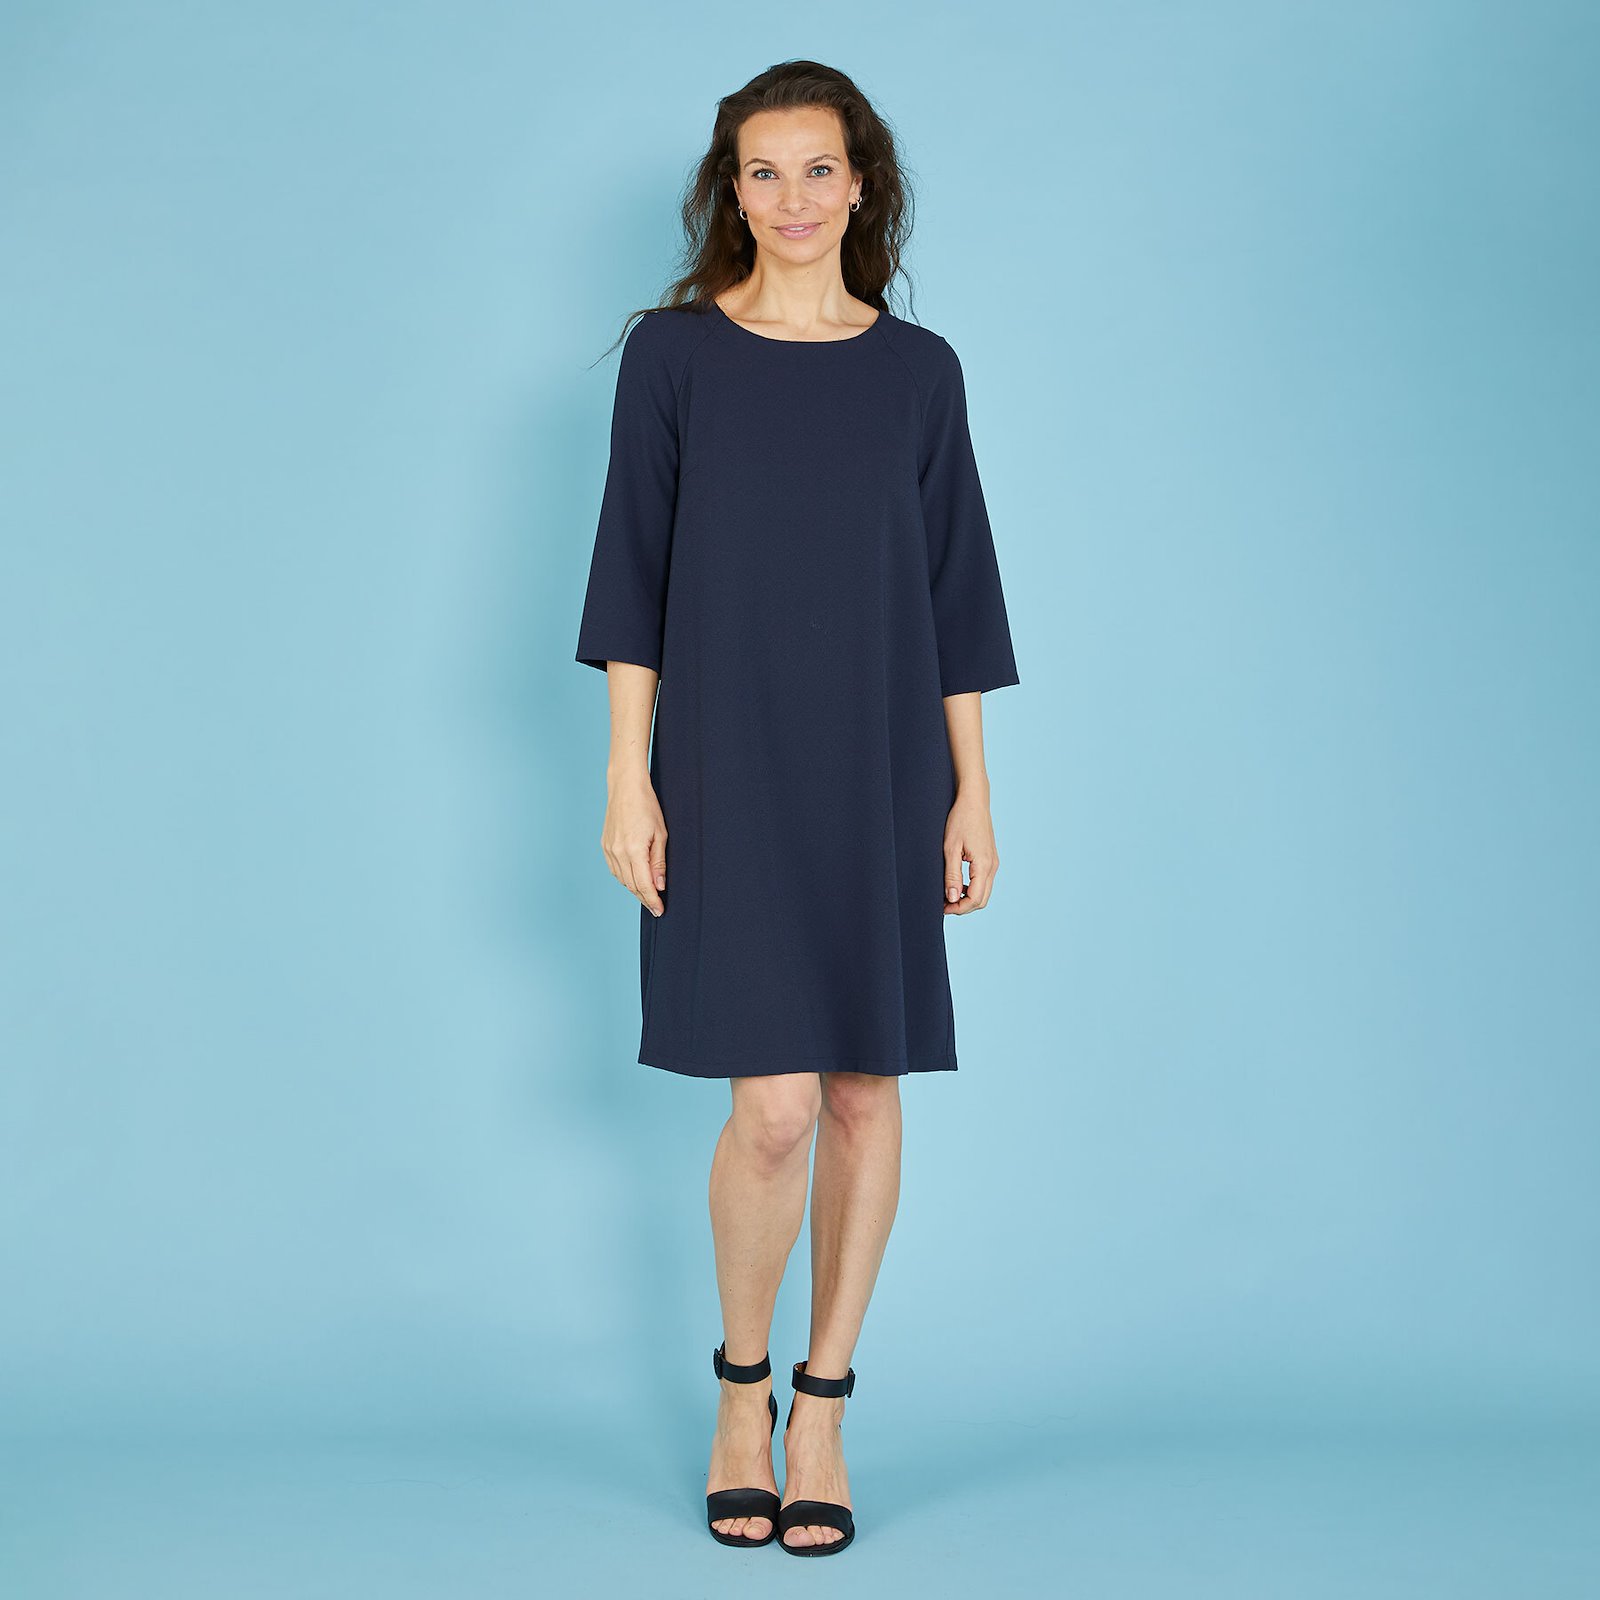 Dress with A-shape and raglan slee, 36/8 p23175000_p23175001_p23175002_p23175003_p23175004_pack_d